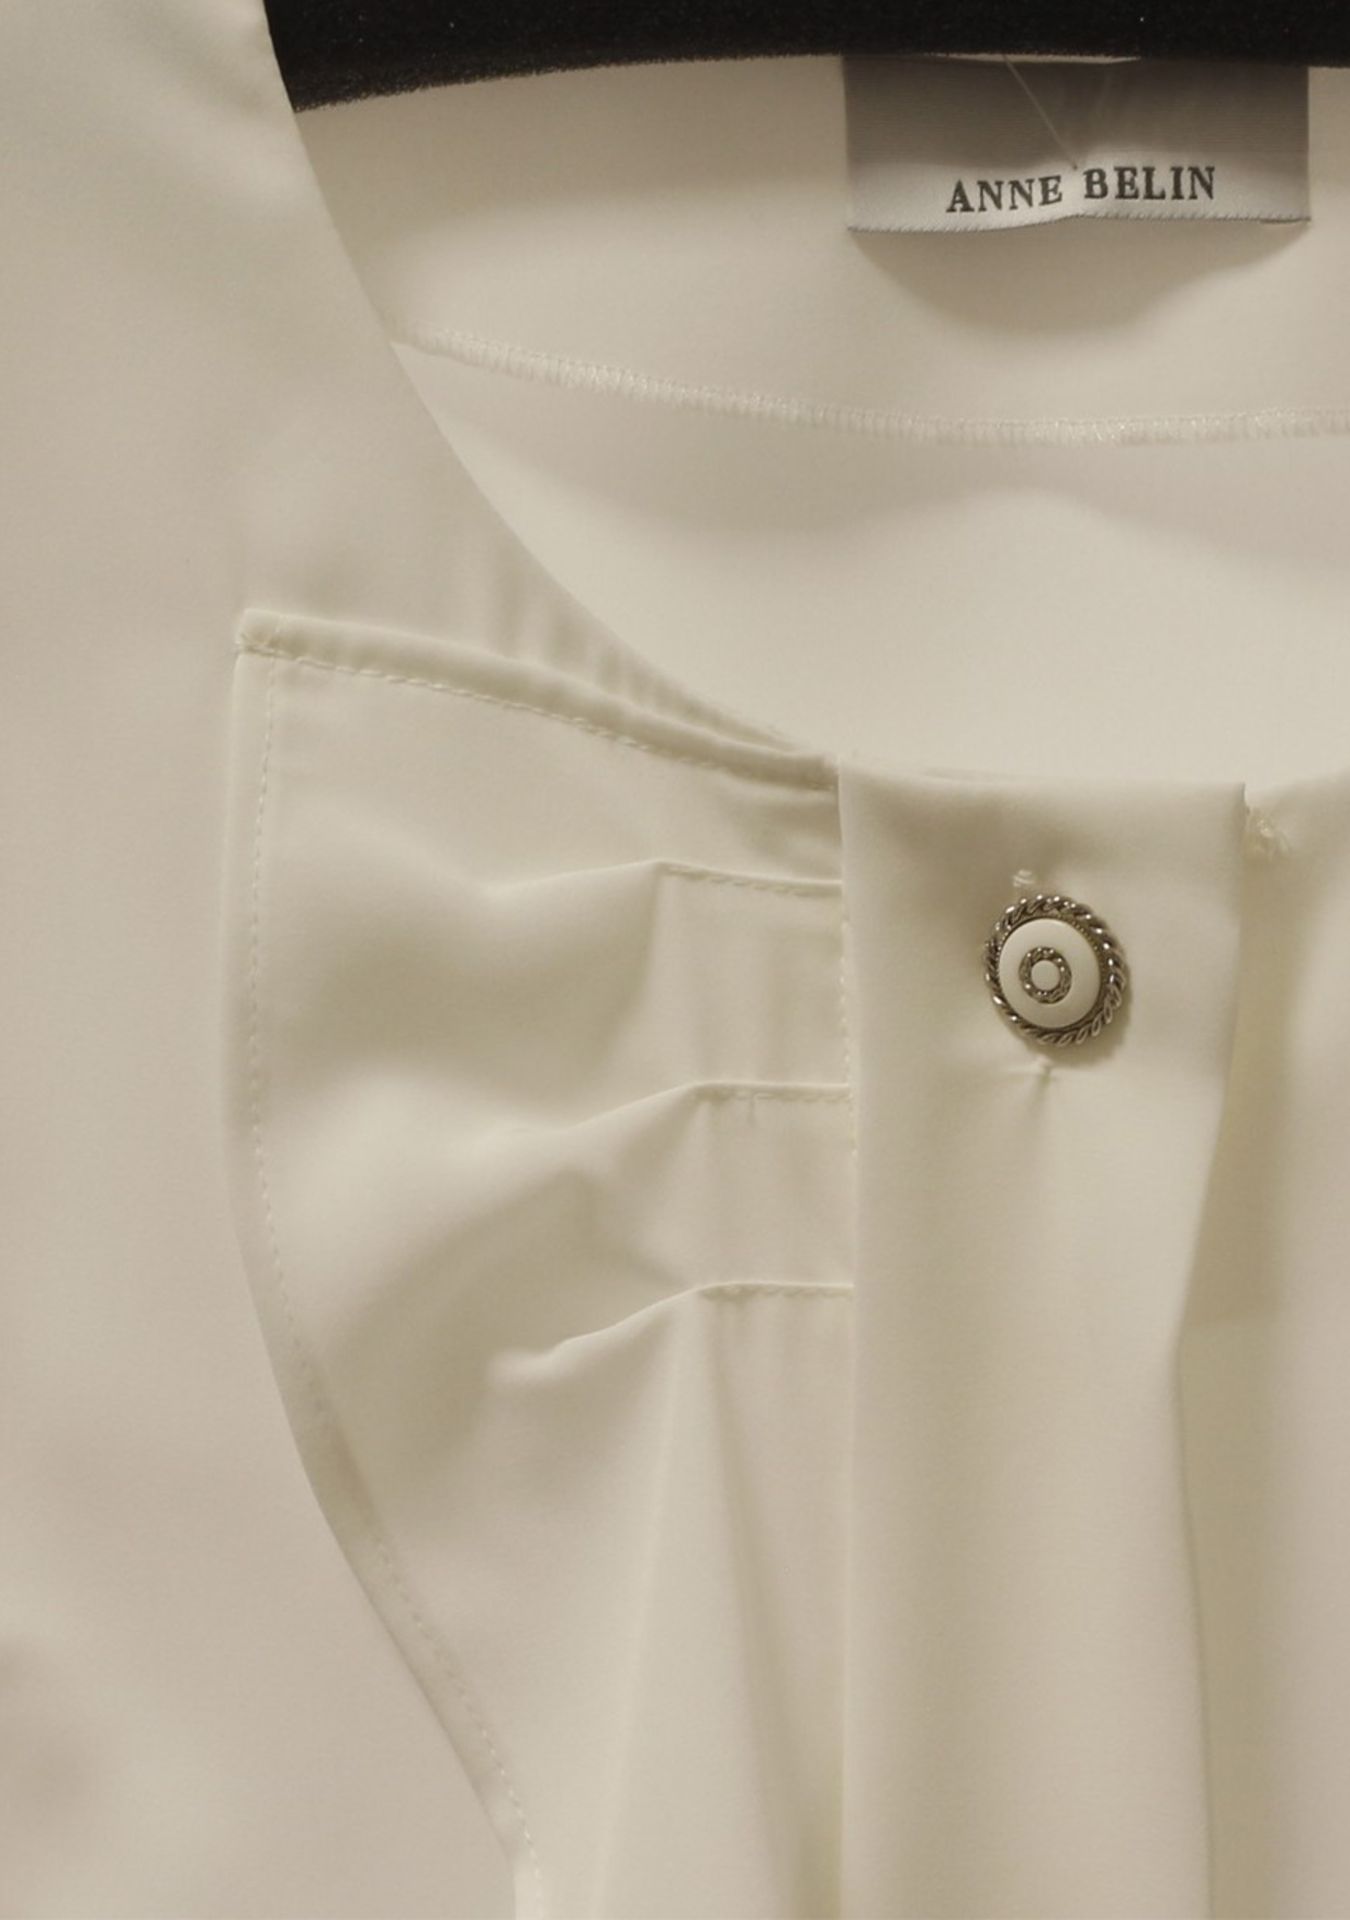 1 x Anne Belin White Shirt - Size: 18 - Material: 100% Polyester - From a High End Clothing Boutique - Image 3 of 9